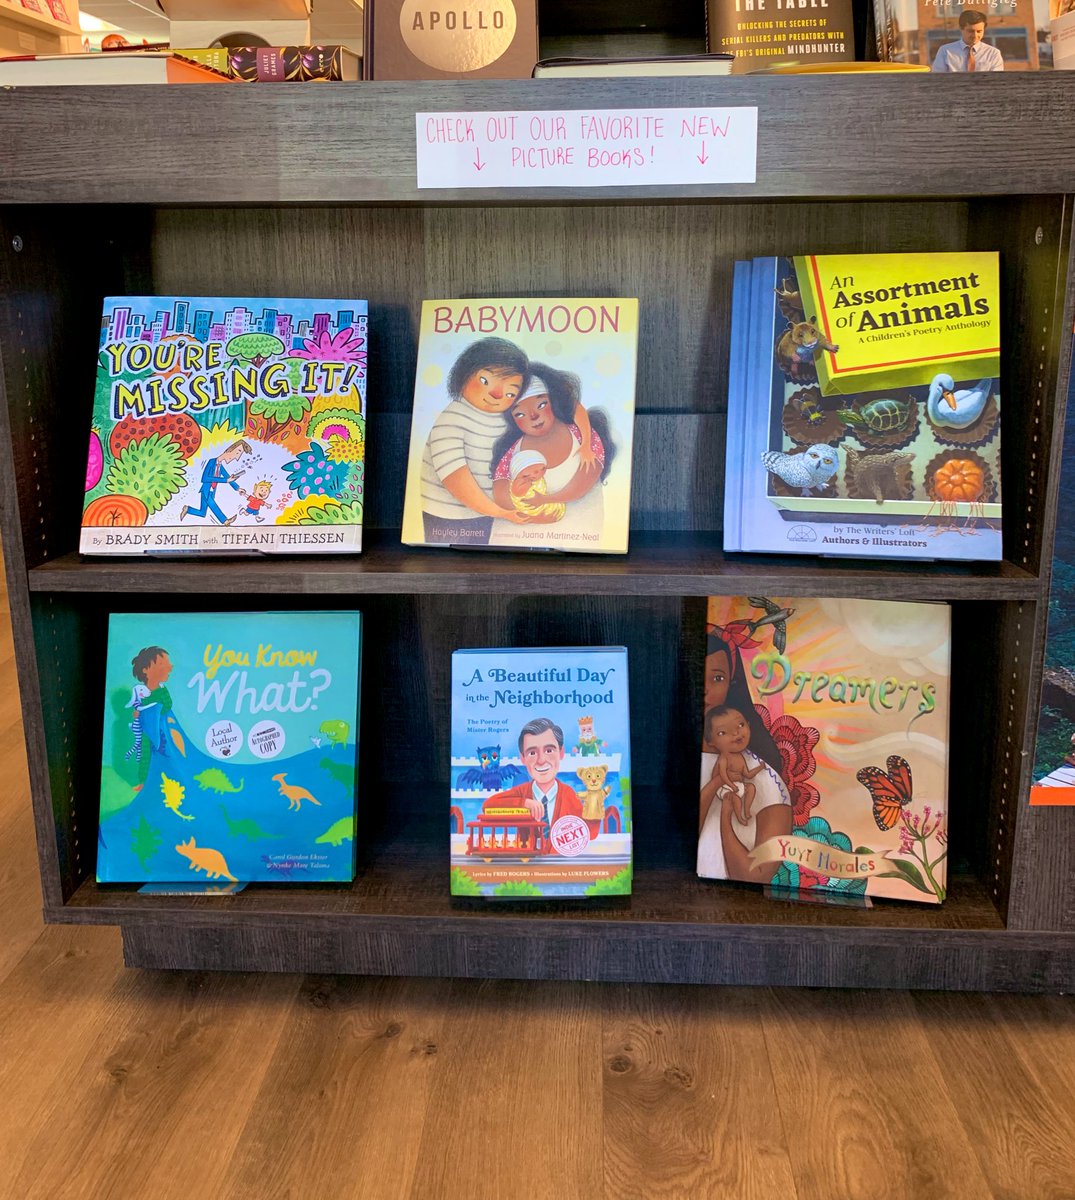 Saw some of my favorite authors at my local bookstore @SilUnicornActon  including @cekster @hayleybwrites @writersloftma under “our favorite new picture books” #KidLit #pb #indiebooks #kidlitwomen #amreading #authors